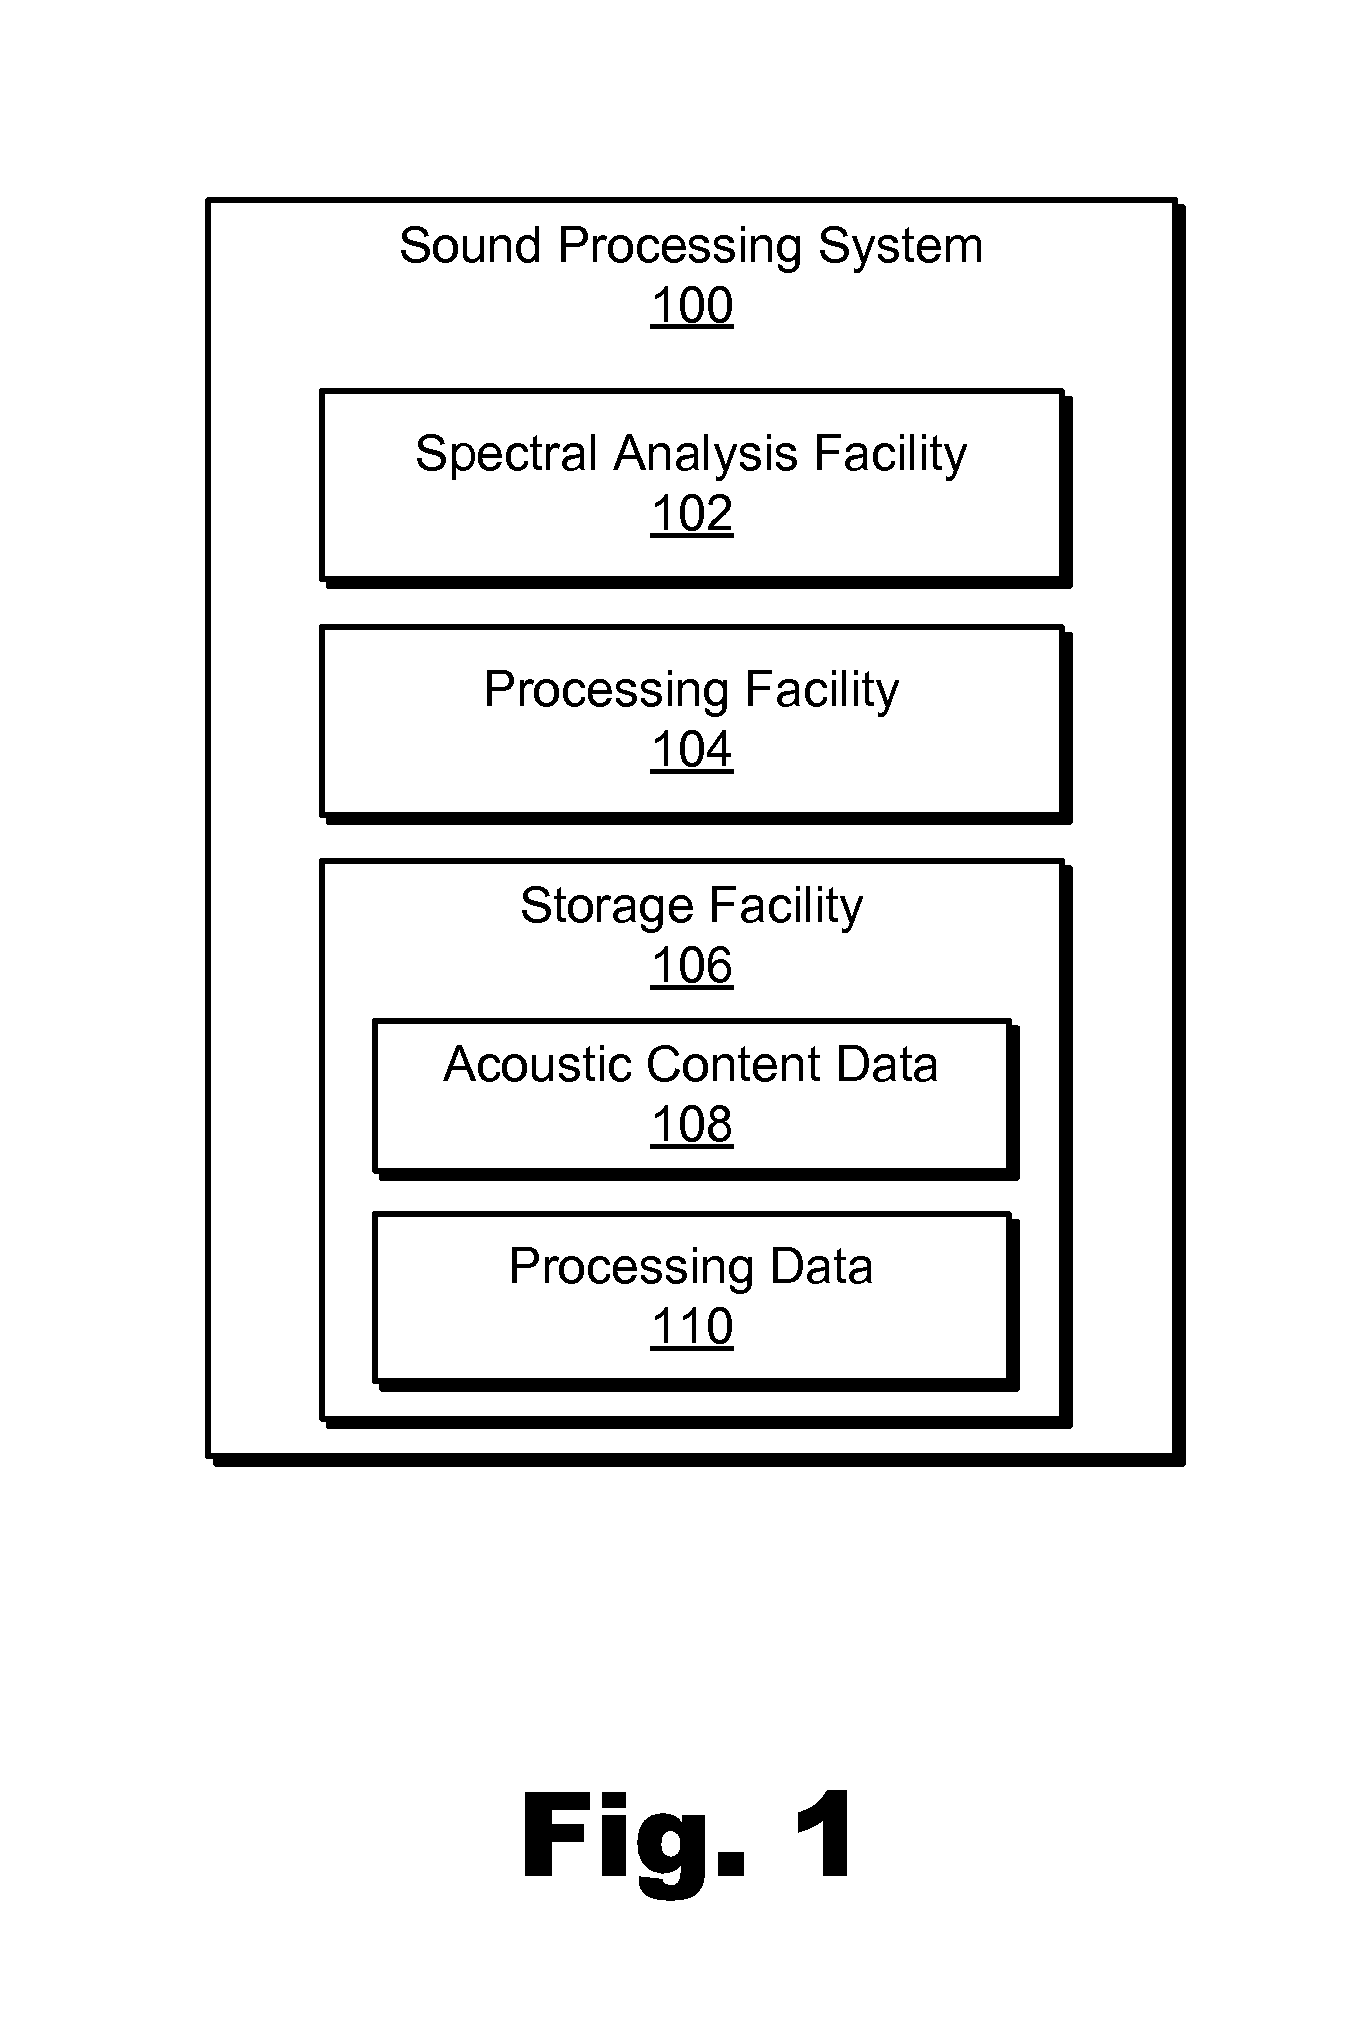 Systems and methods for facilitating binaural hearing by a cochlear implant patient